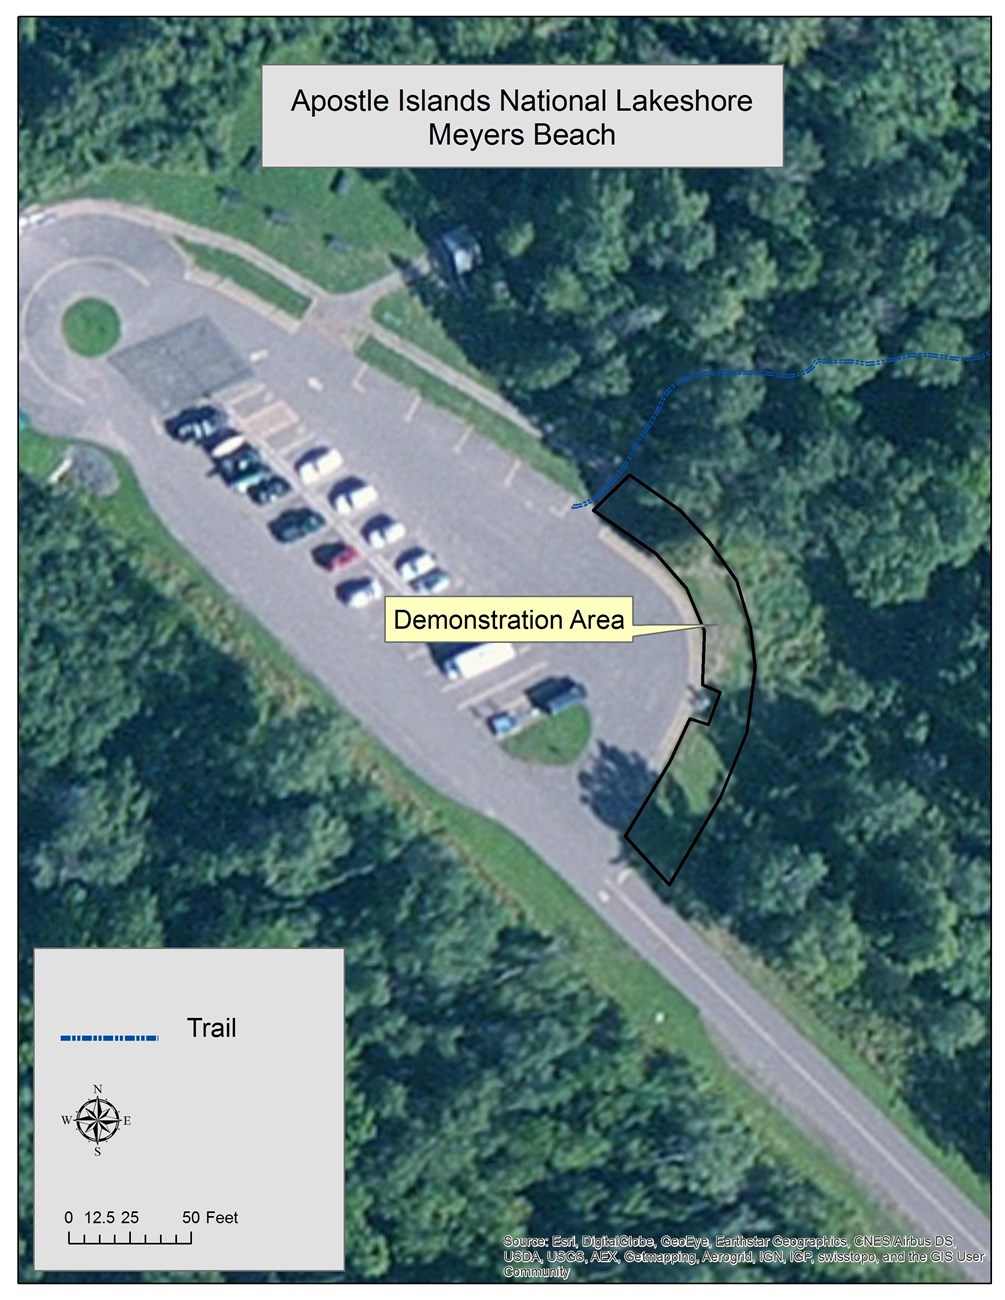 Aerial view of a paved parking lot with cars surrounded by trees. An area in the grass, on the eastern edge of the lot, is outlined in black and designates the first amendment demonstration area for the National Lakeshore.